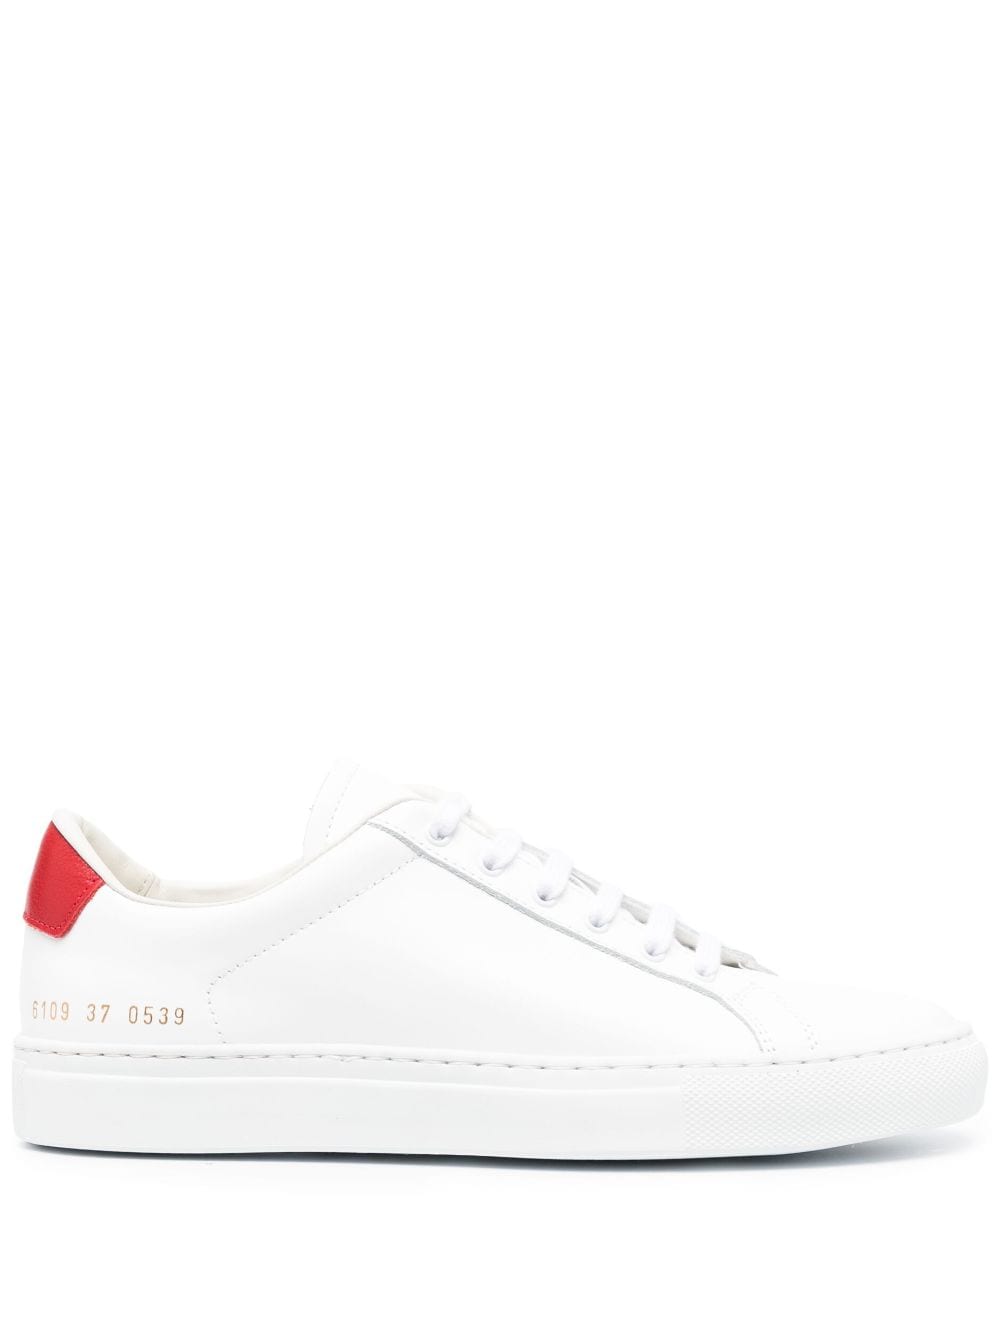 Common Projects Retro low-top sneakers - White von Common Projects